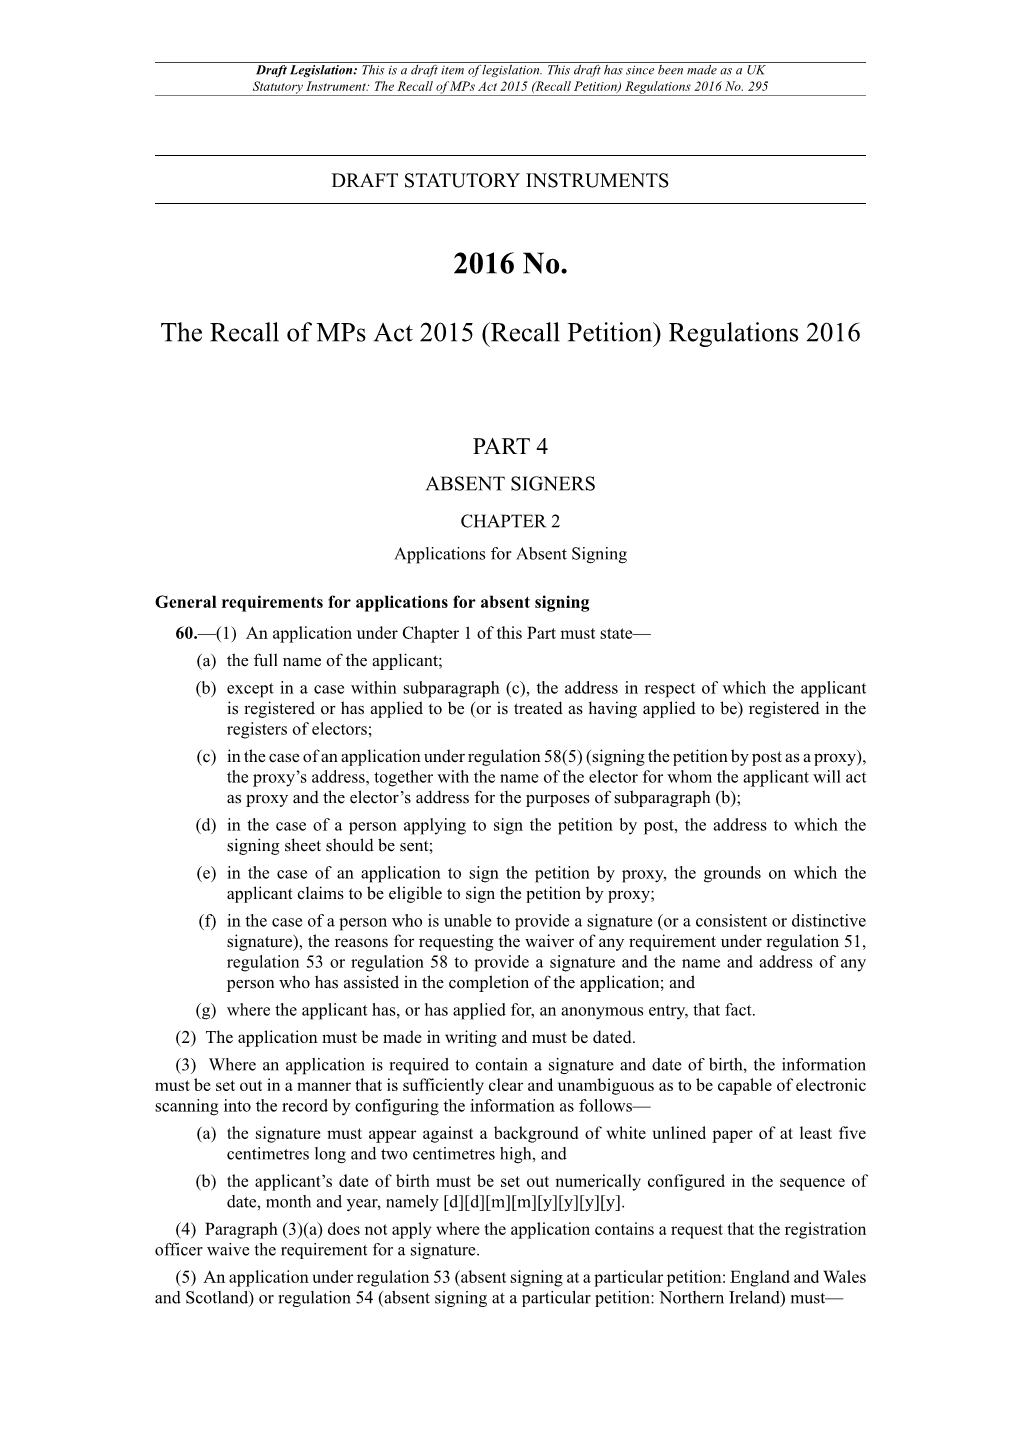 The Recall of Mps Act 2015 (Recall Petition) Regulations 2016 No